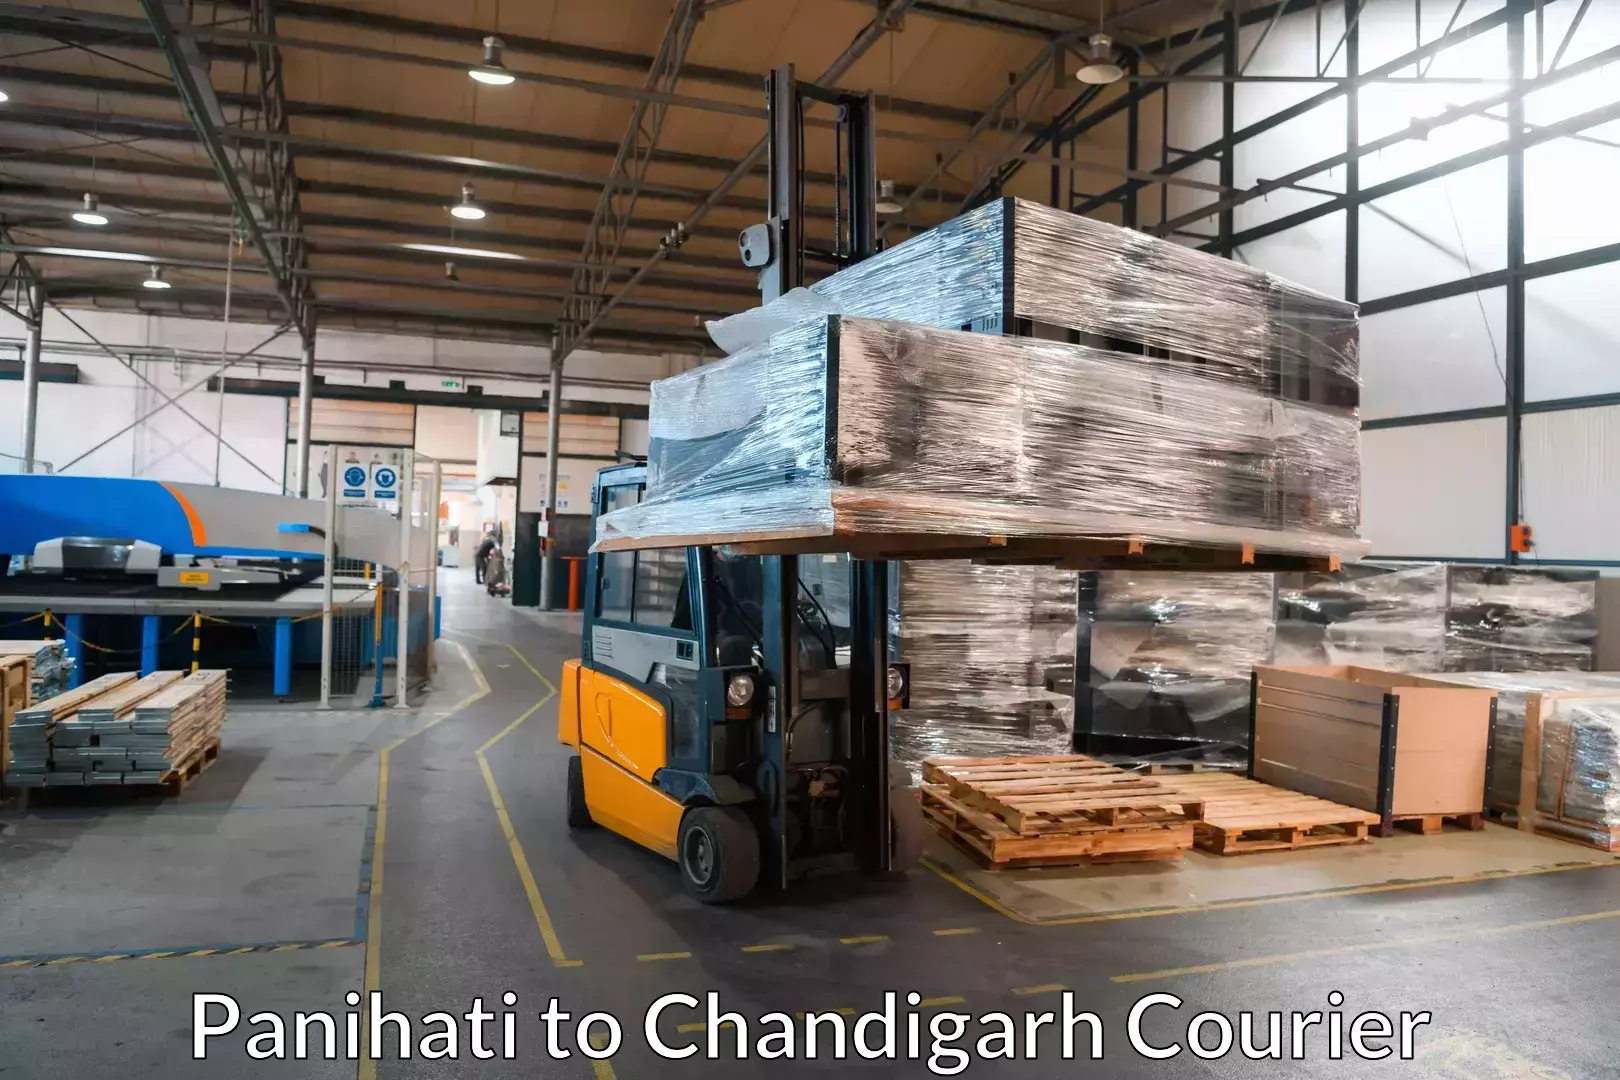 Moving and storage services Panihati to Chandigarh